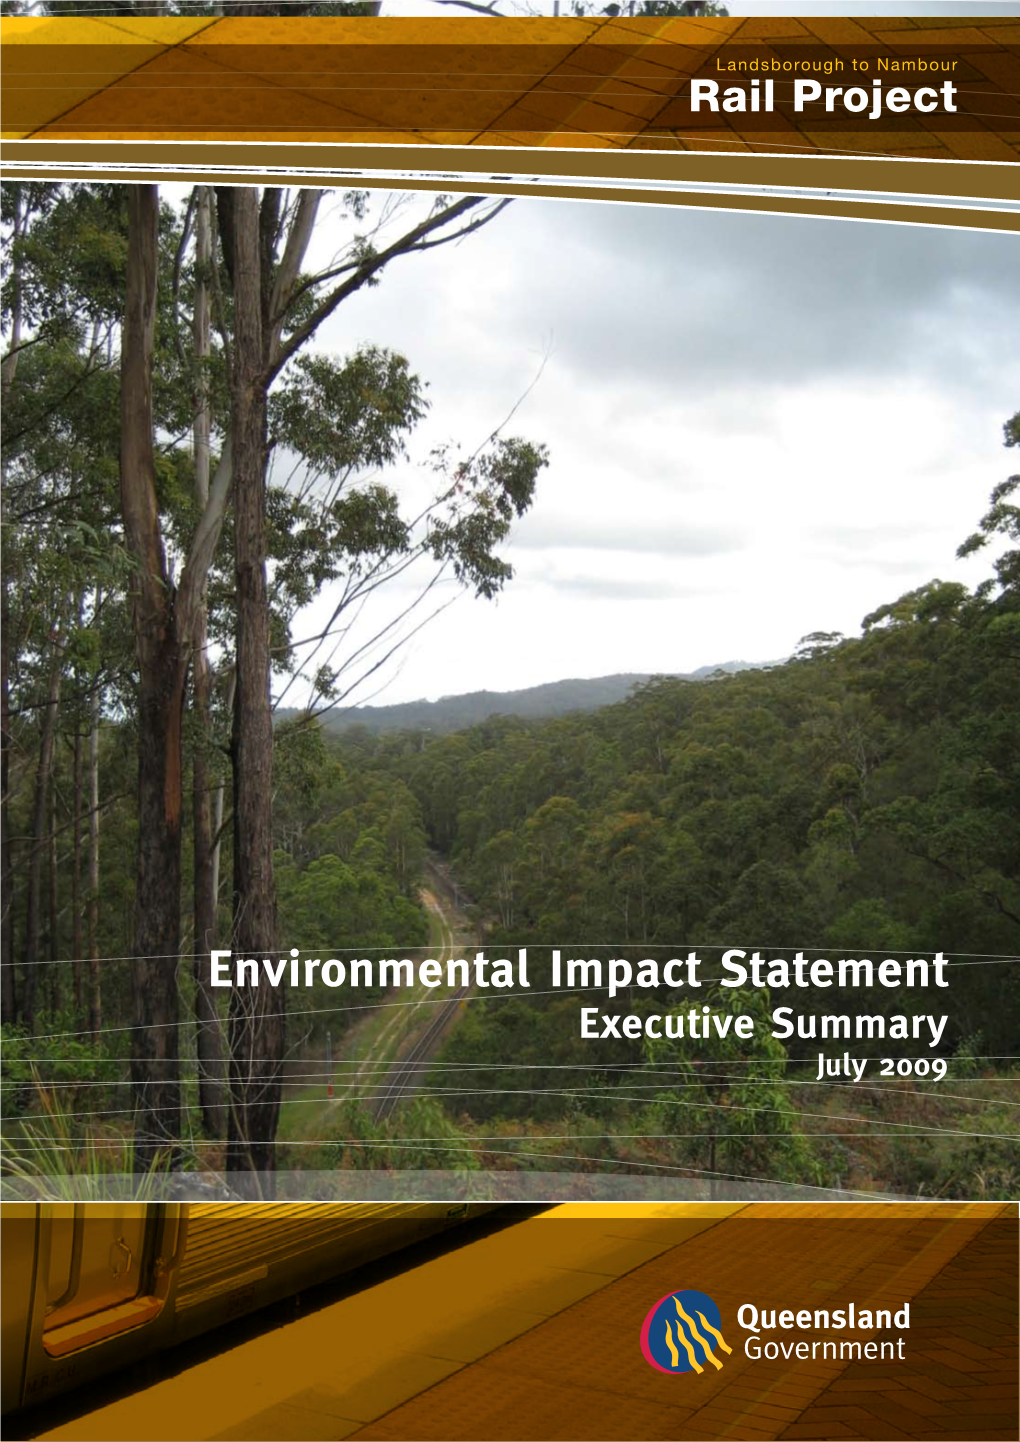 Environmental Impact Statement Executive Summary July 2009 Figure 1: Project Features Landsborough Tonambour -Preferred Route Note: Mapnotto Scale